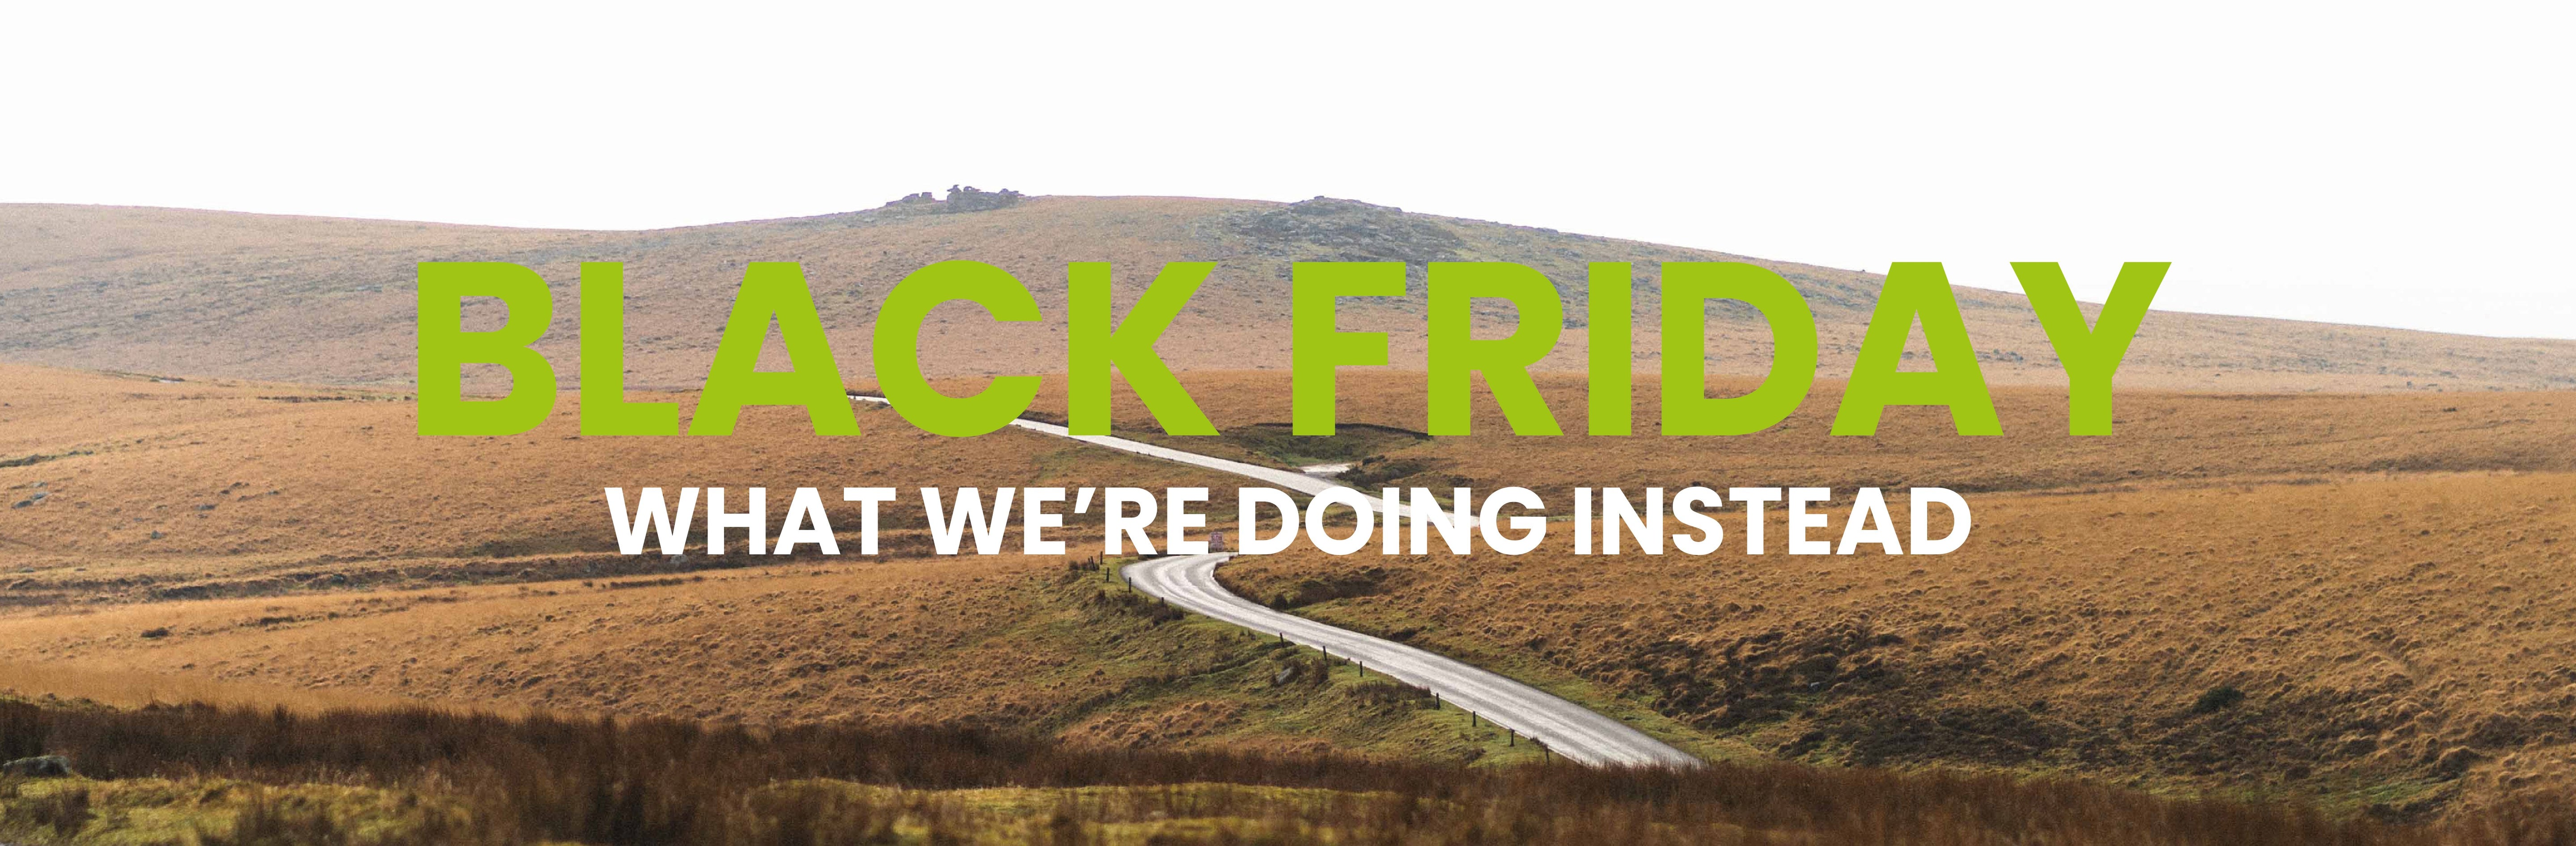 Black Friday - What we're doing instead 🌎 - dewerstone